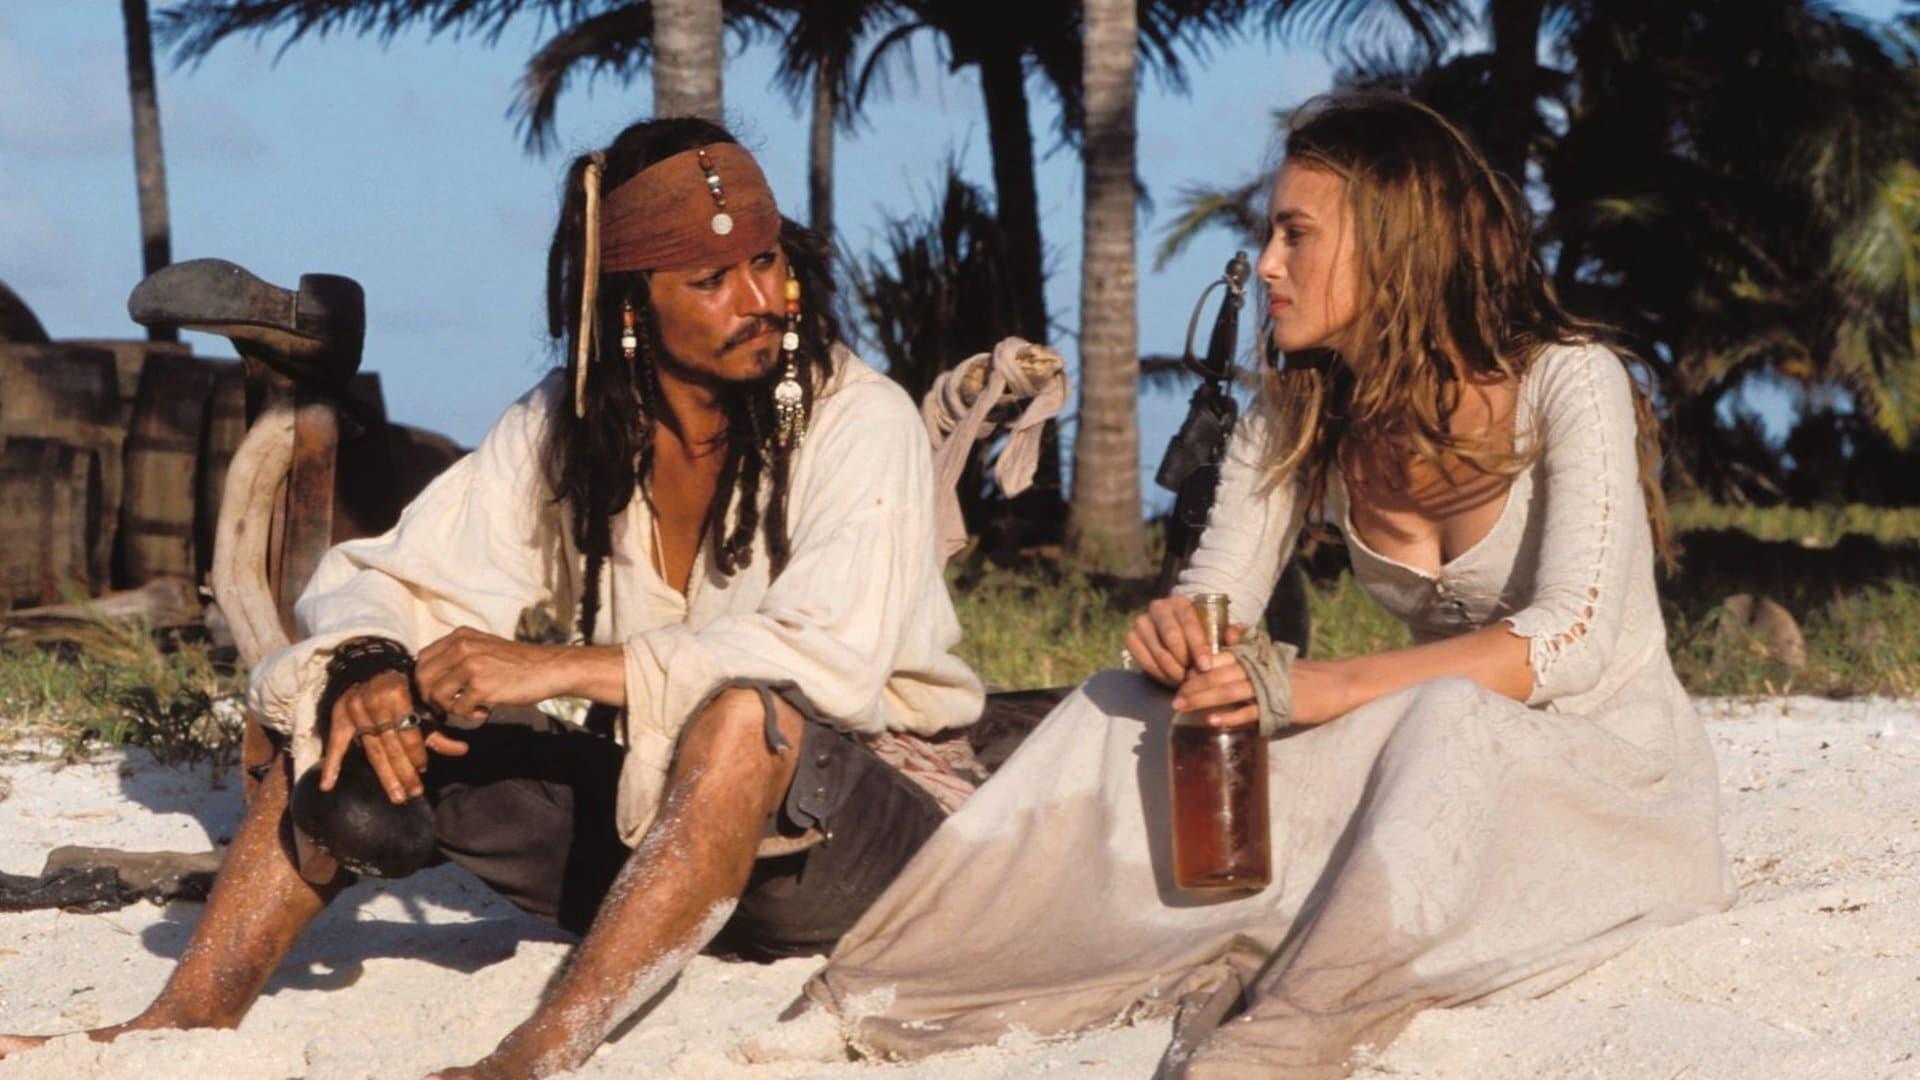 Pirates of the Caribbean: The Curse of the Black Pearl backdrop